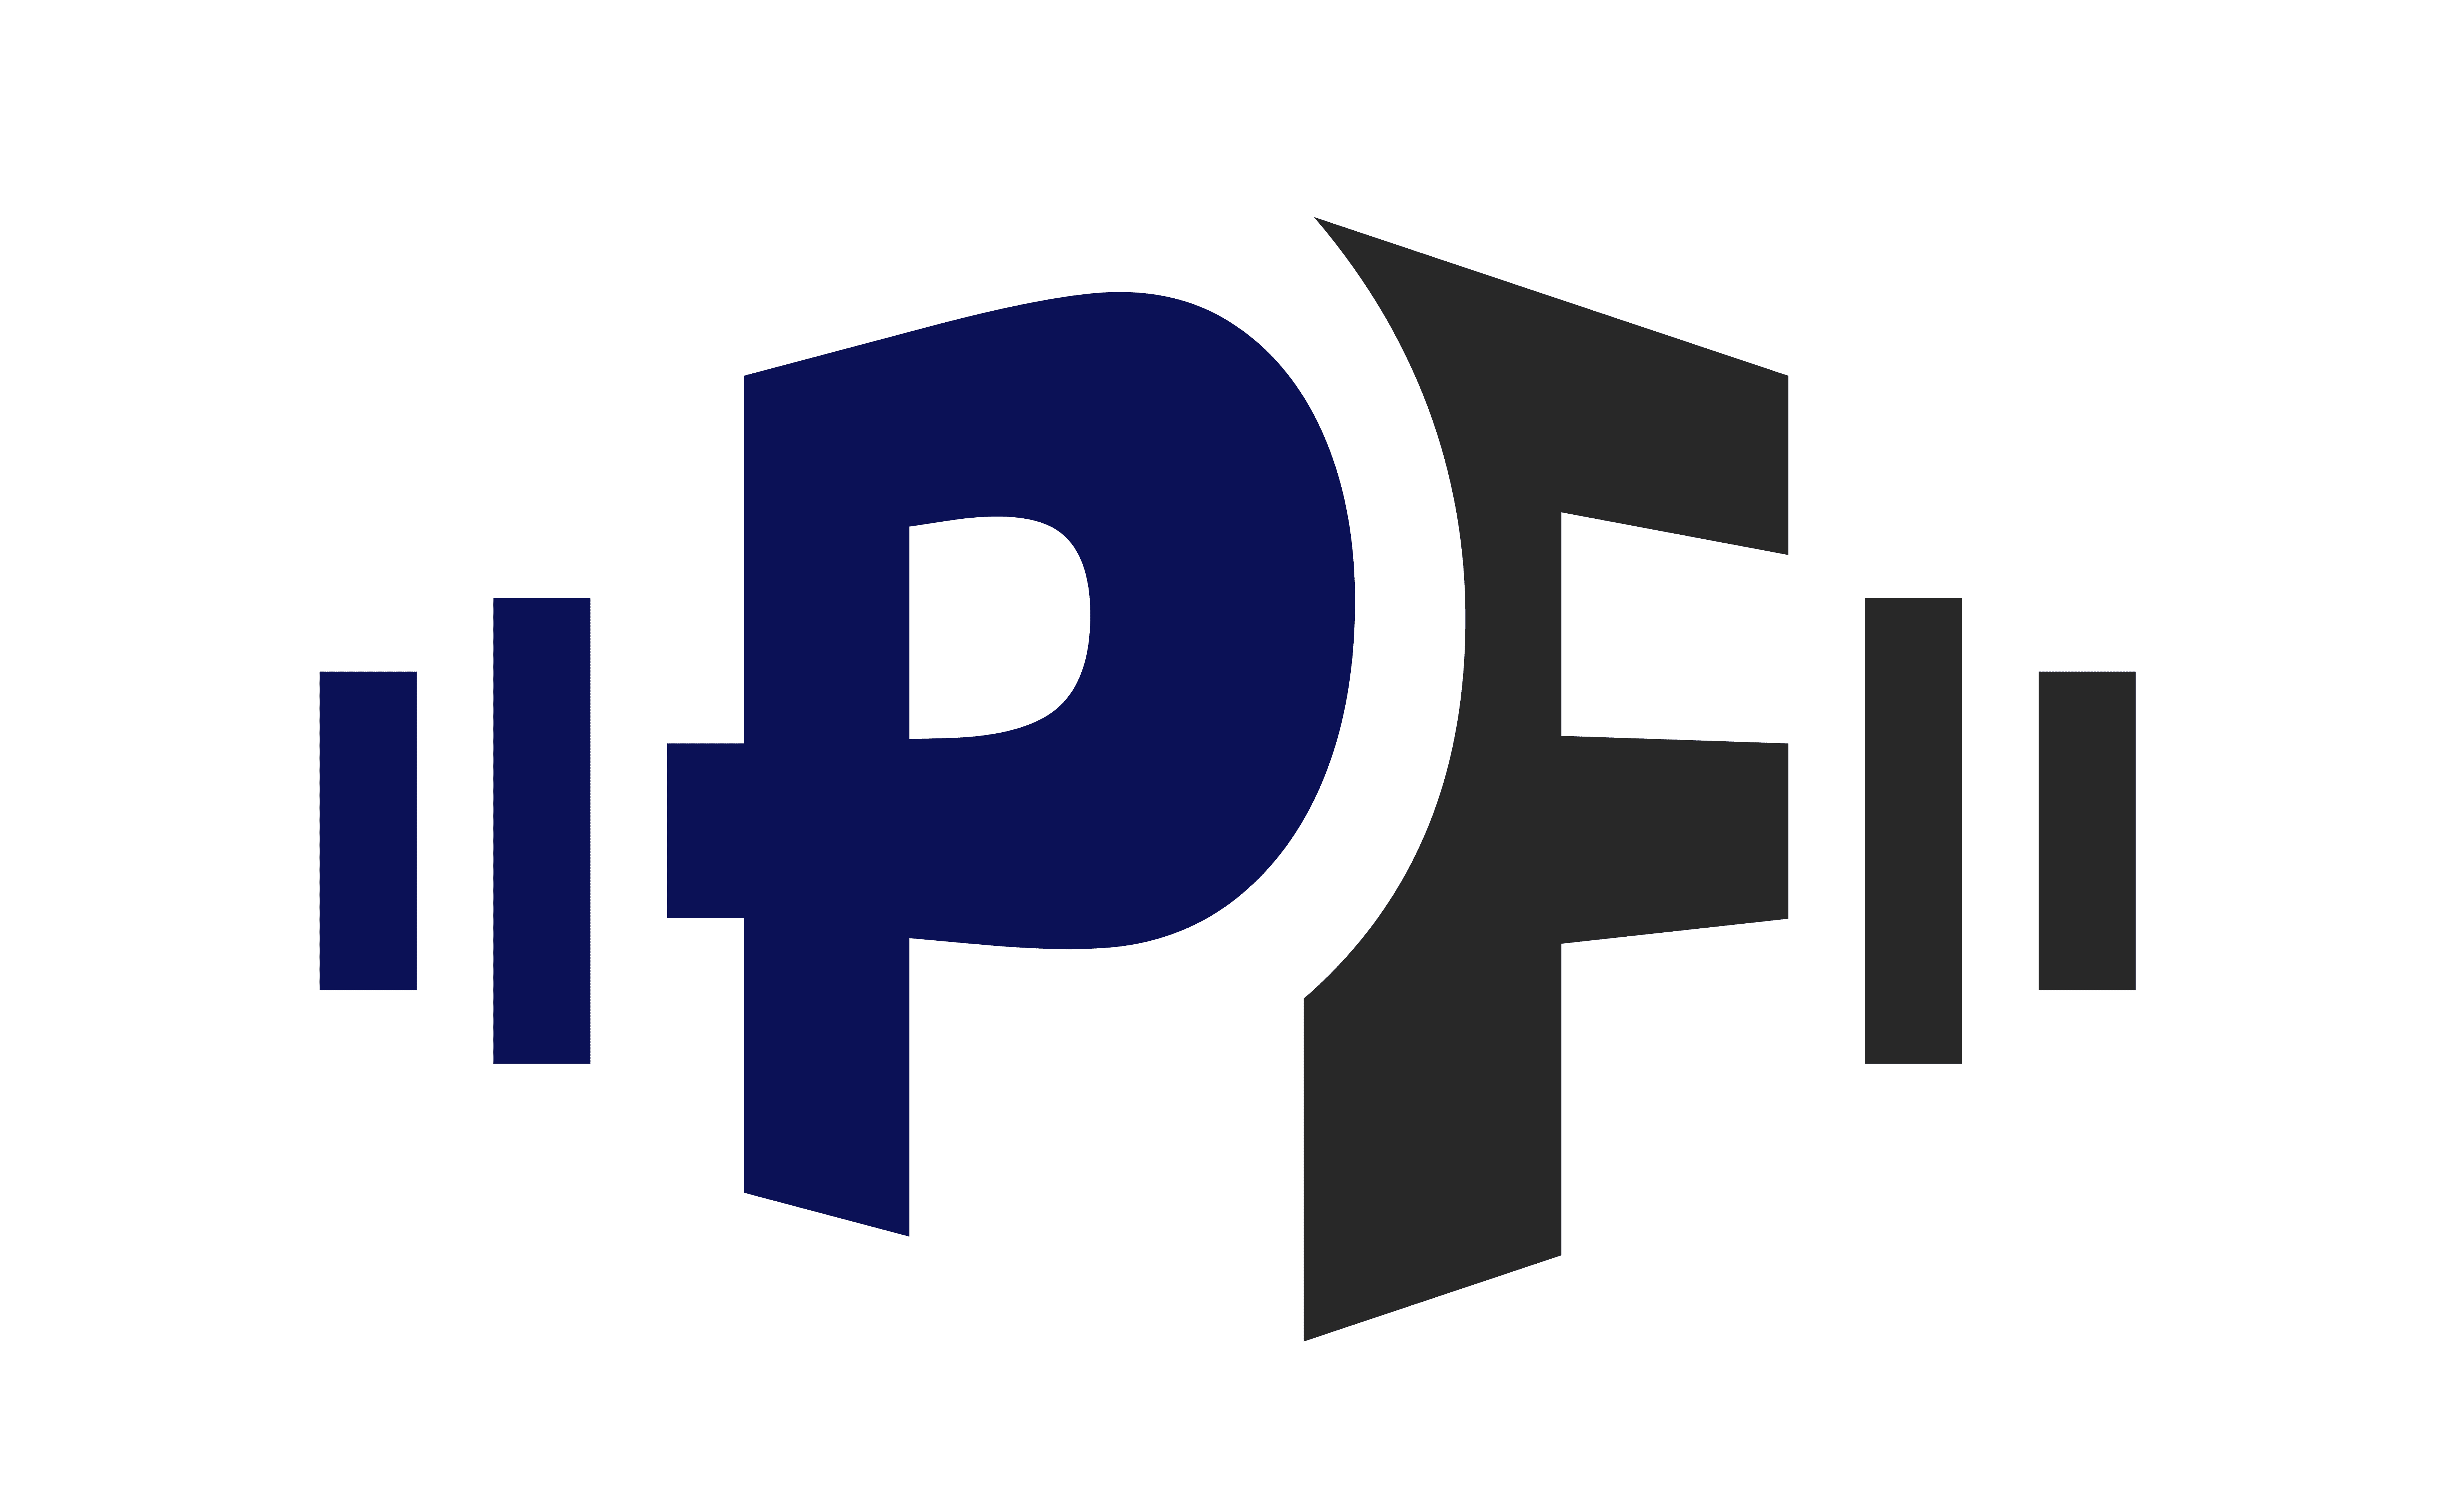 Official Pro Fit Life logo